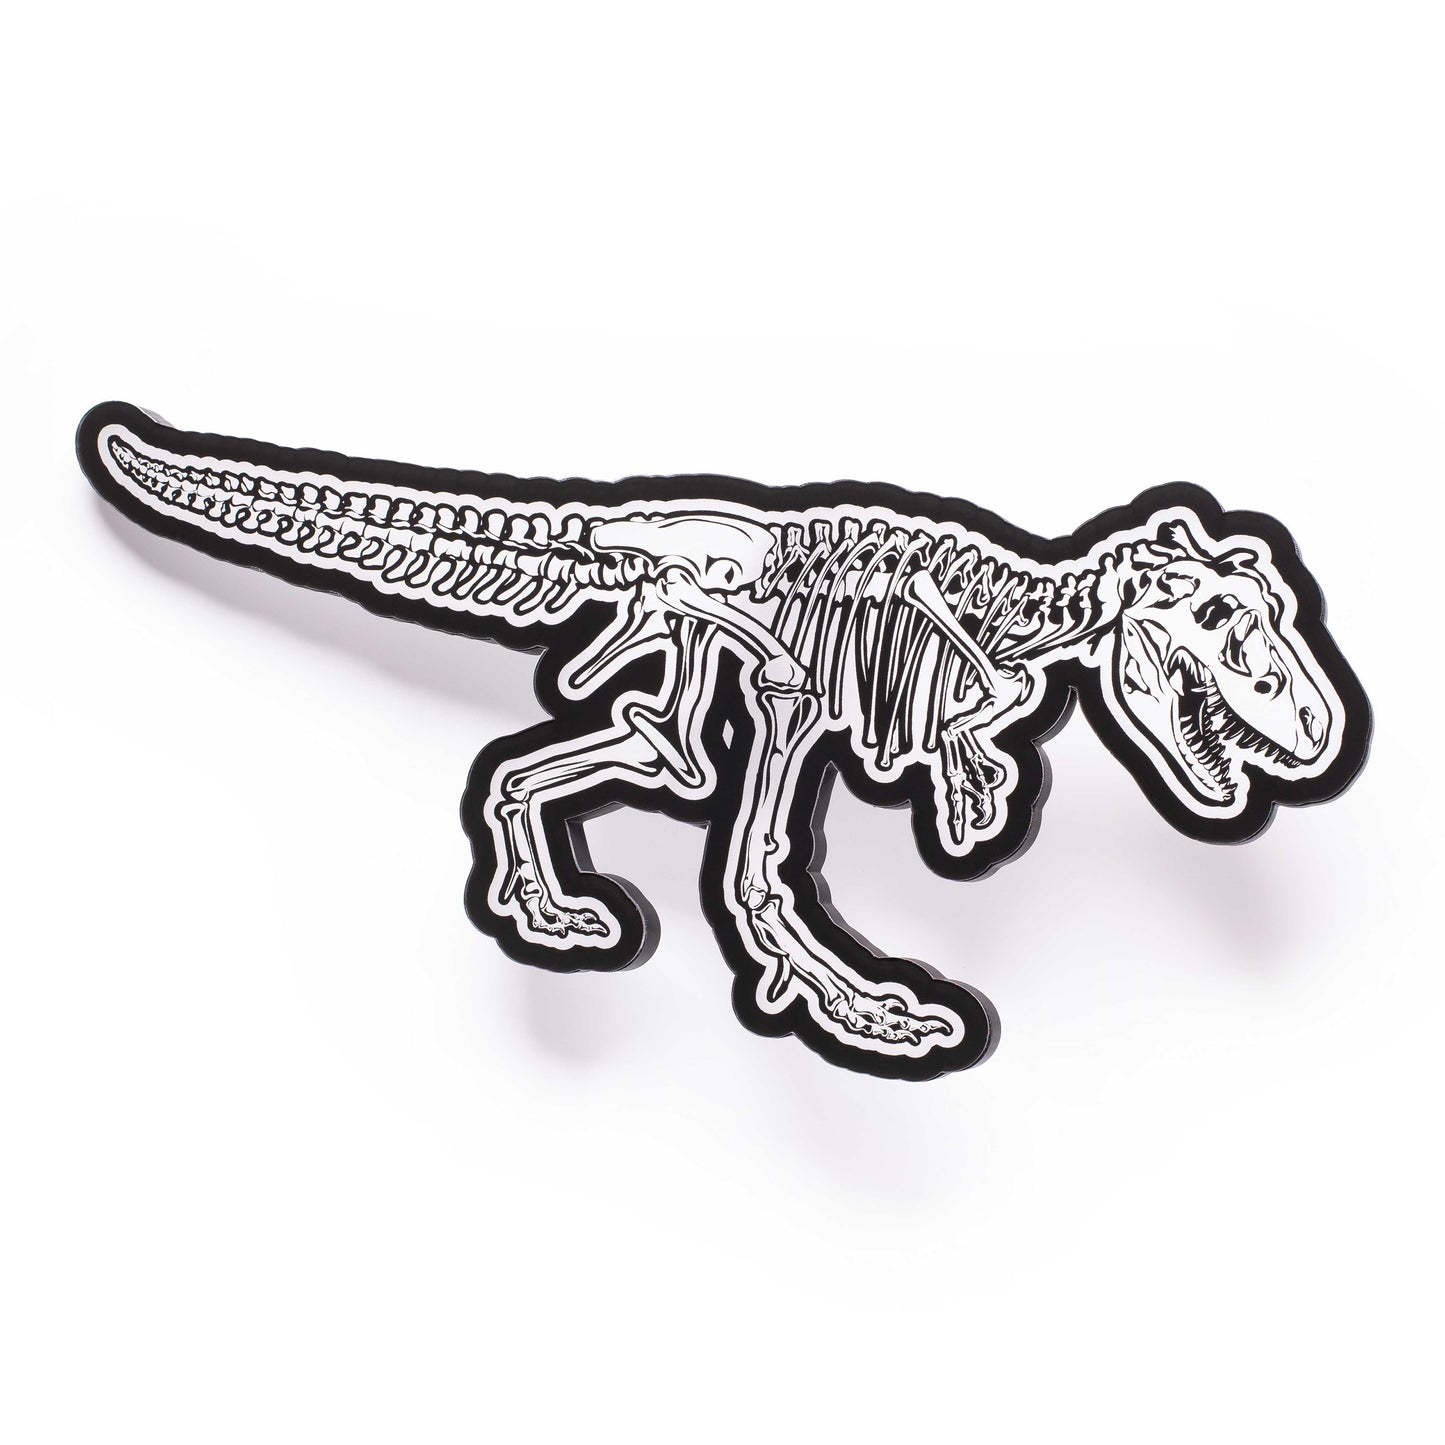 image of a 3d wall mounted acrylic light featuring an epic dinosaur themed illustration of a t-rex skeleton.